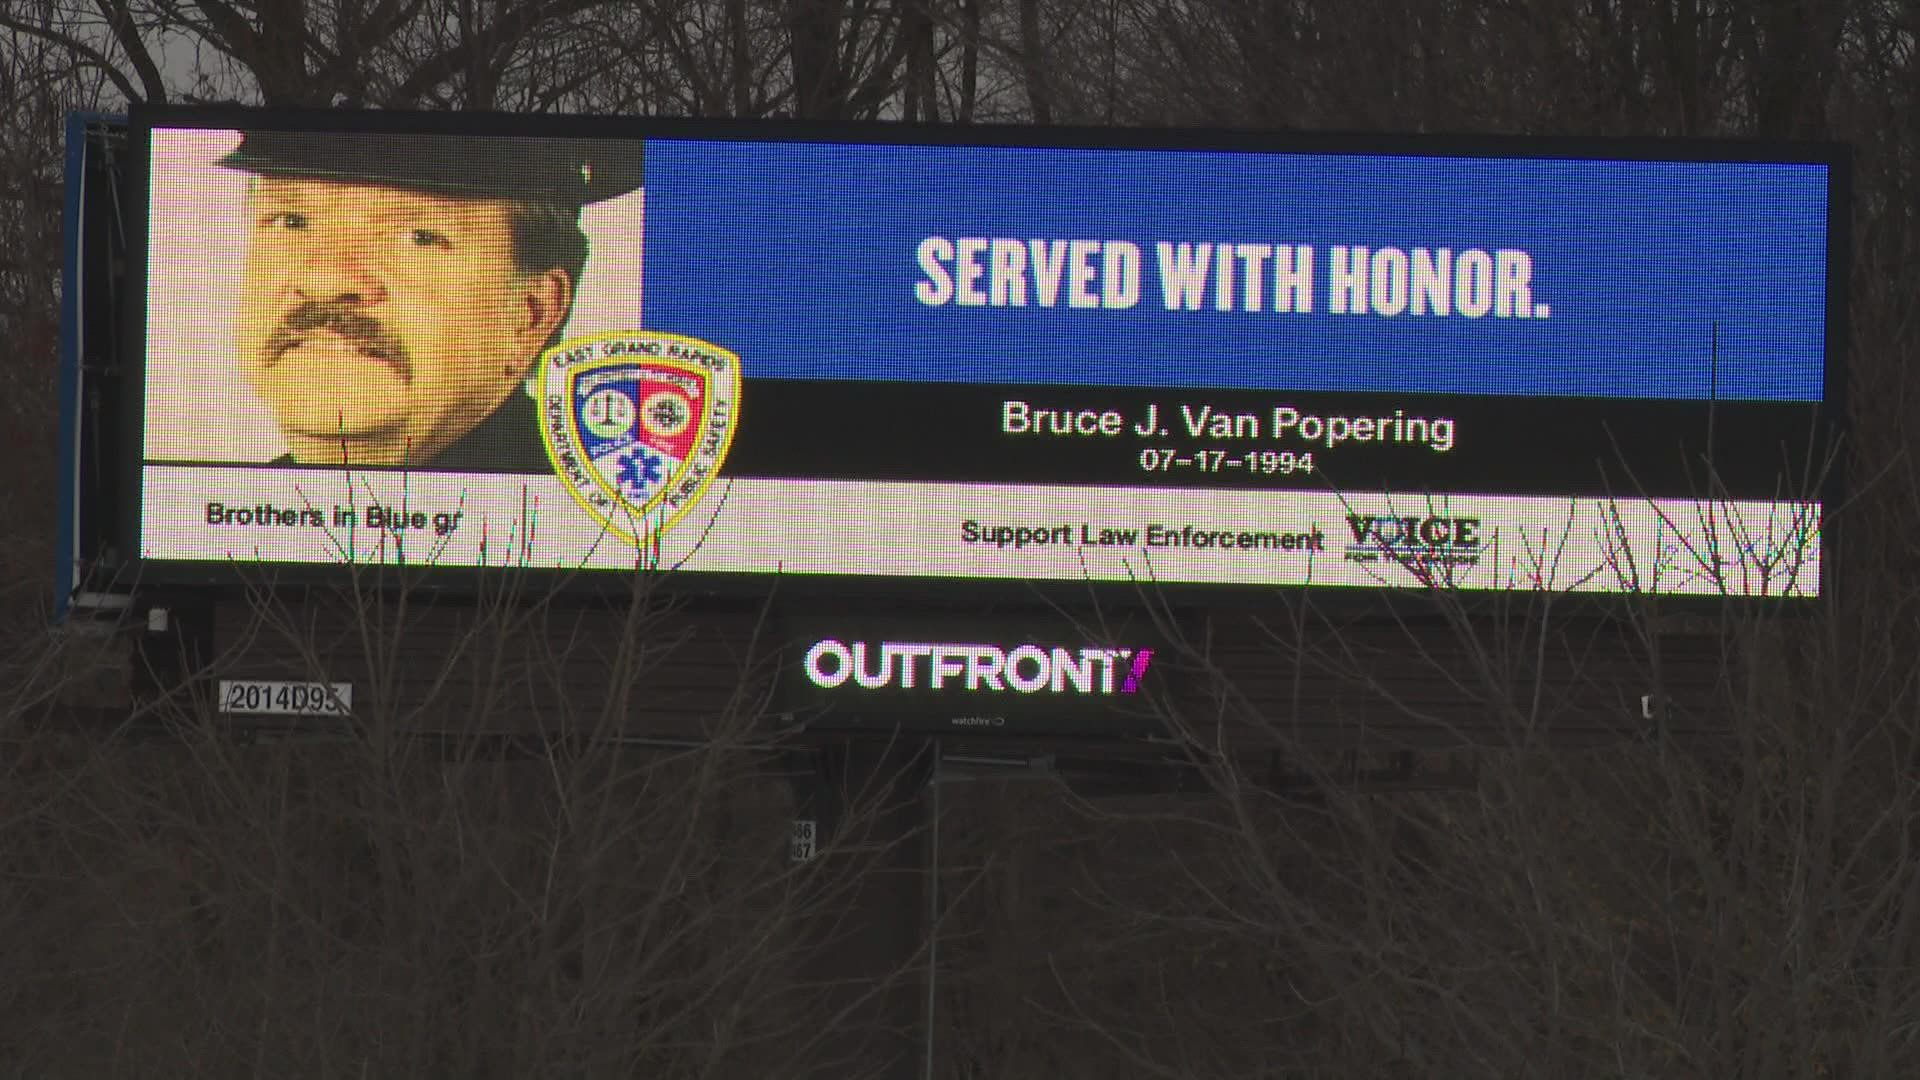 An East Grand Rapids Police Officer is being honored during the month of February, nearly 30 years after he was hit by a drunk driver and died of his injuries.